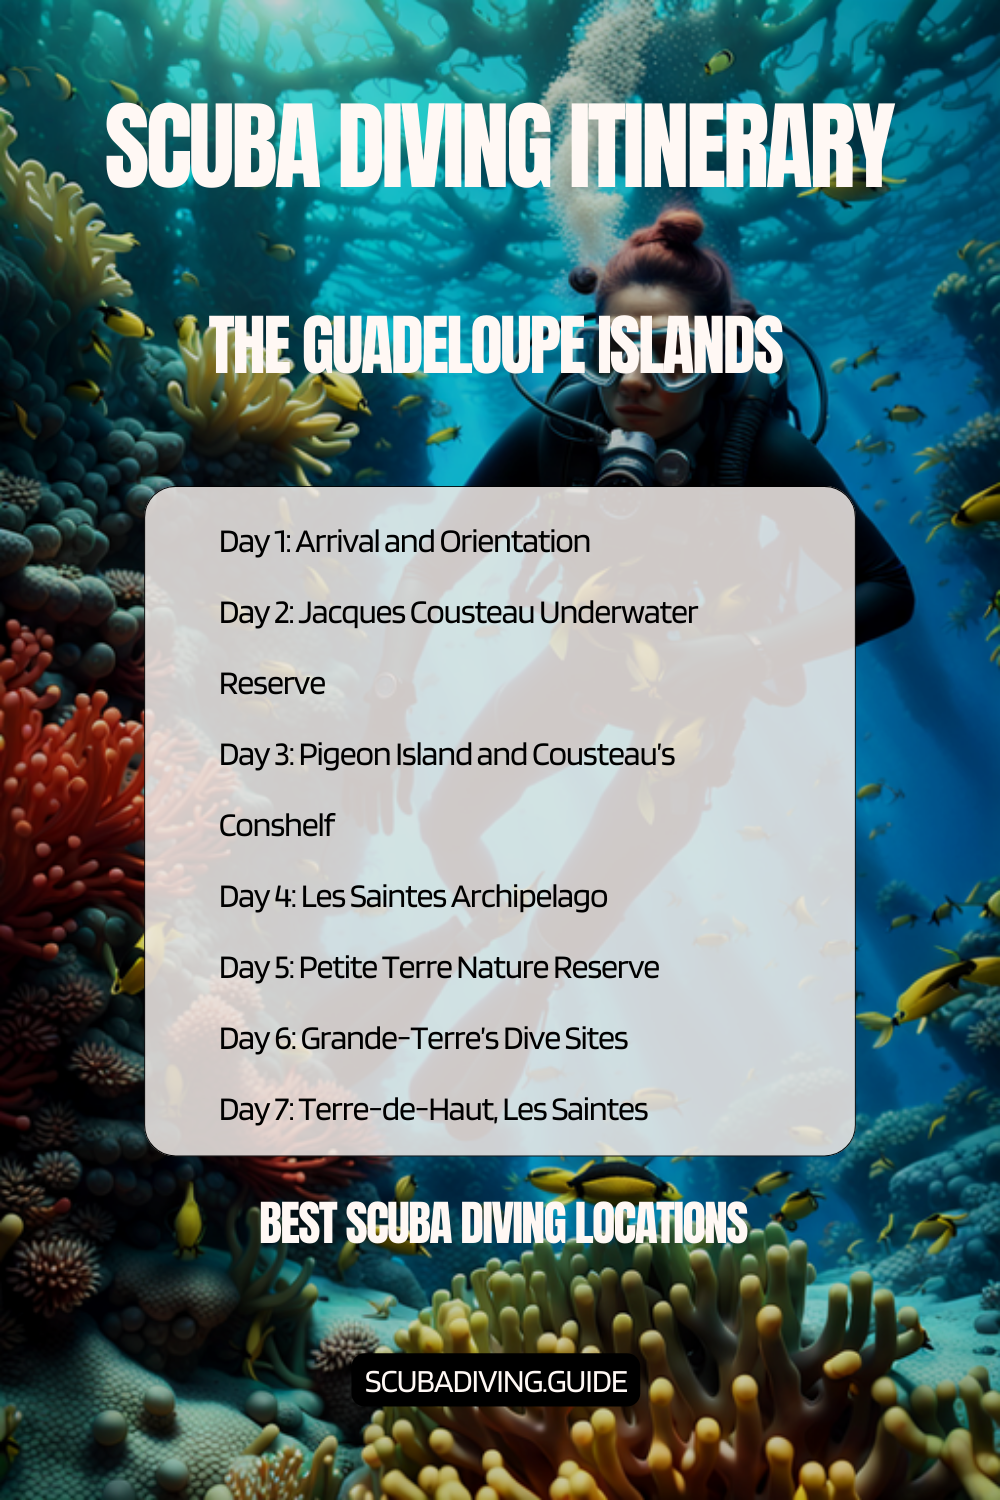 Guadeloupe Islands Recommended Scuba Diving Itinerary